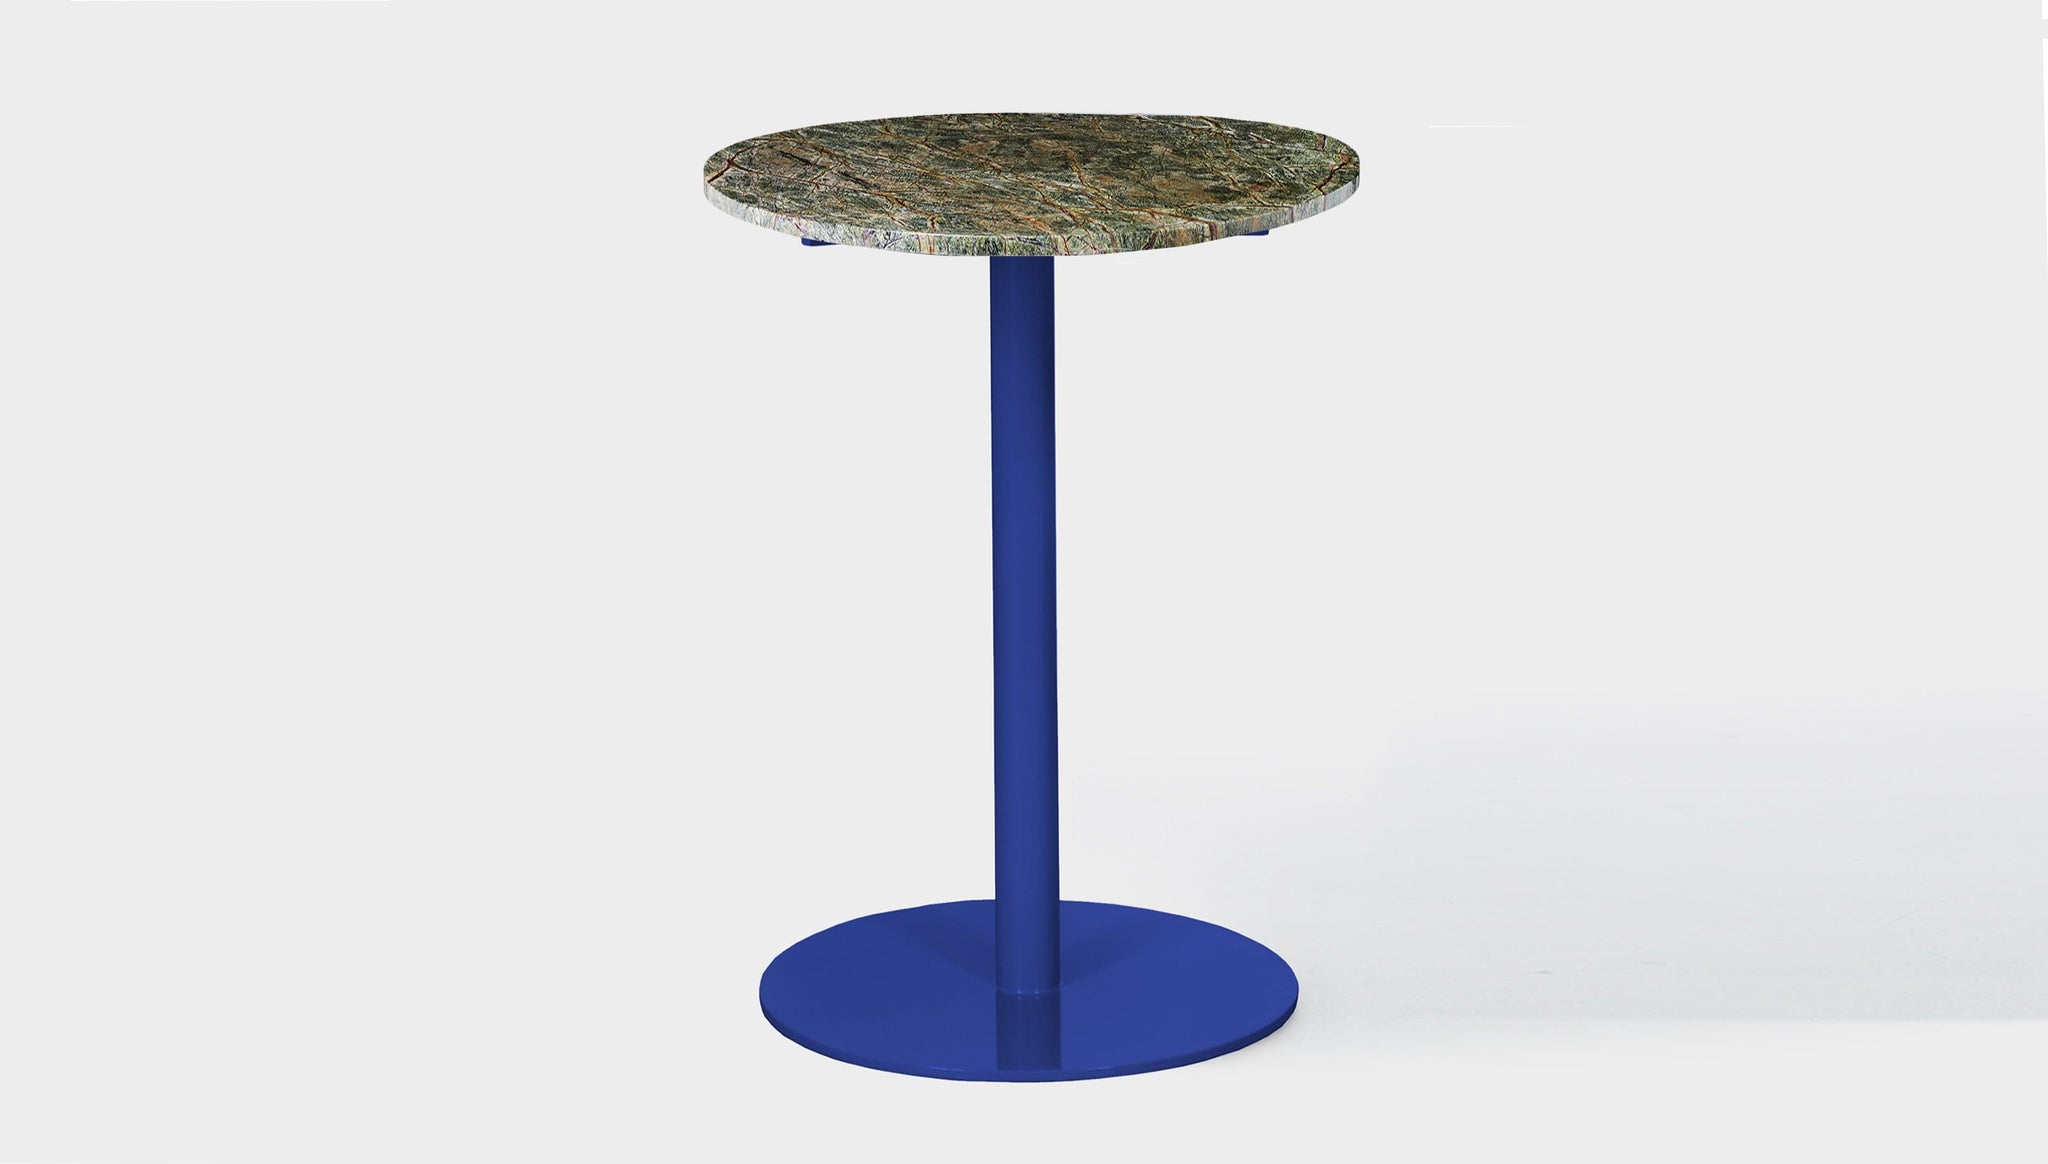 reddie-raw round 60dia x 100H *cm / Stone~Forest Green / Metal~Navy Bob Pedestal Table Marble Cafe & Bar Table (2 heights)